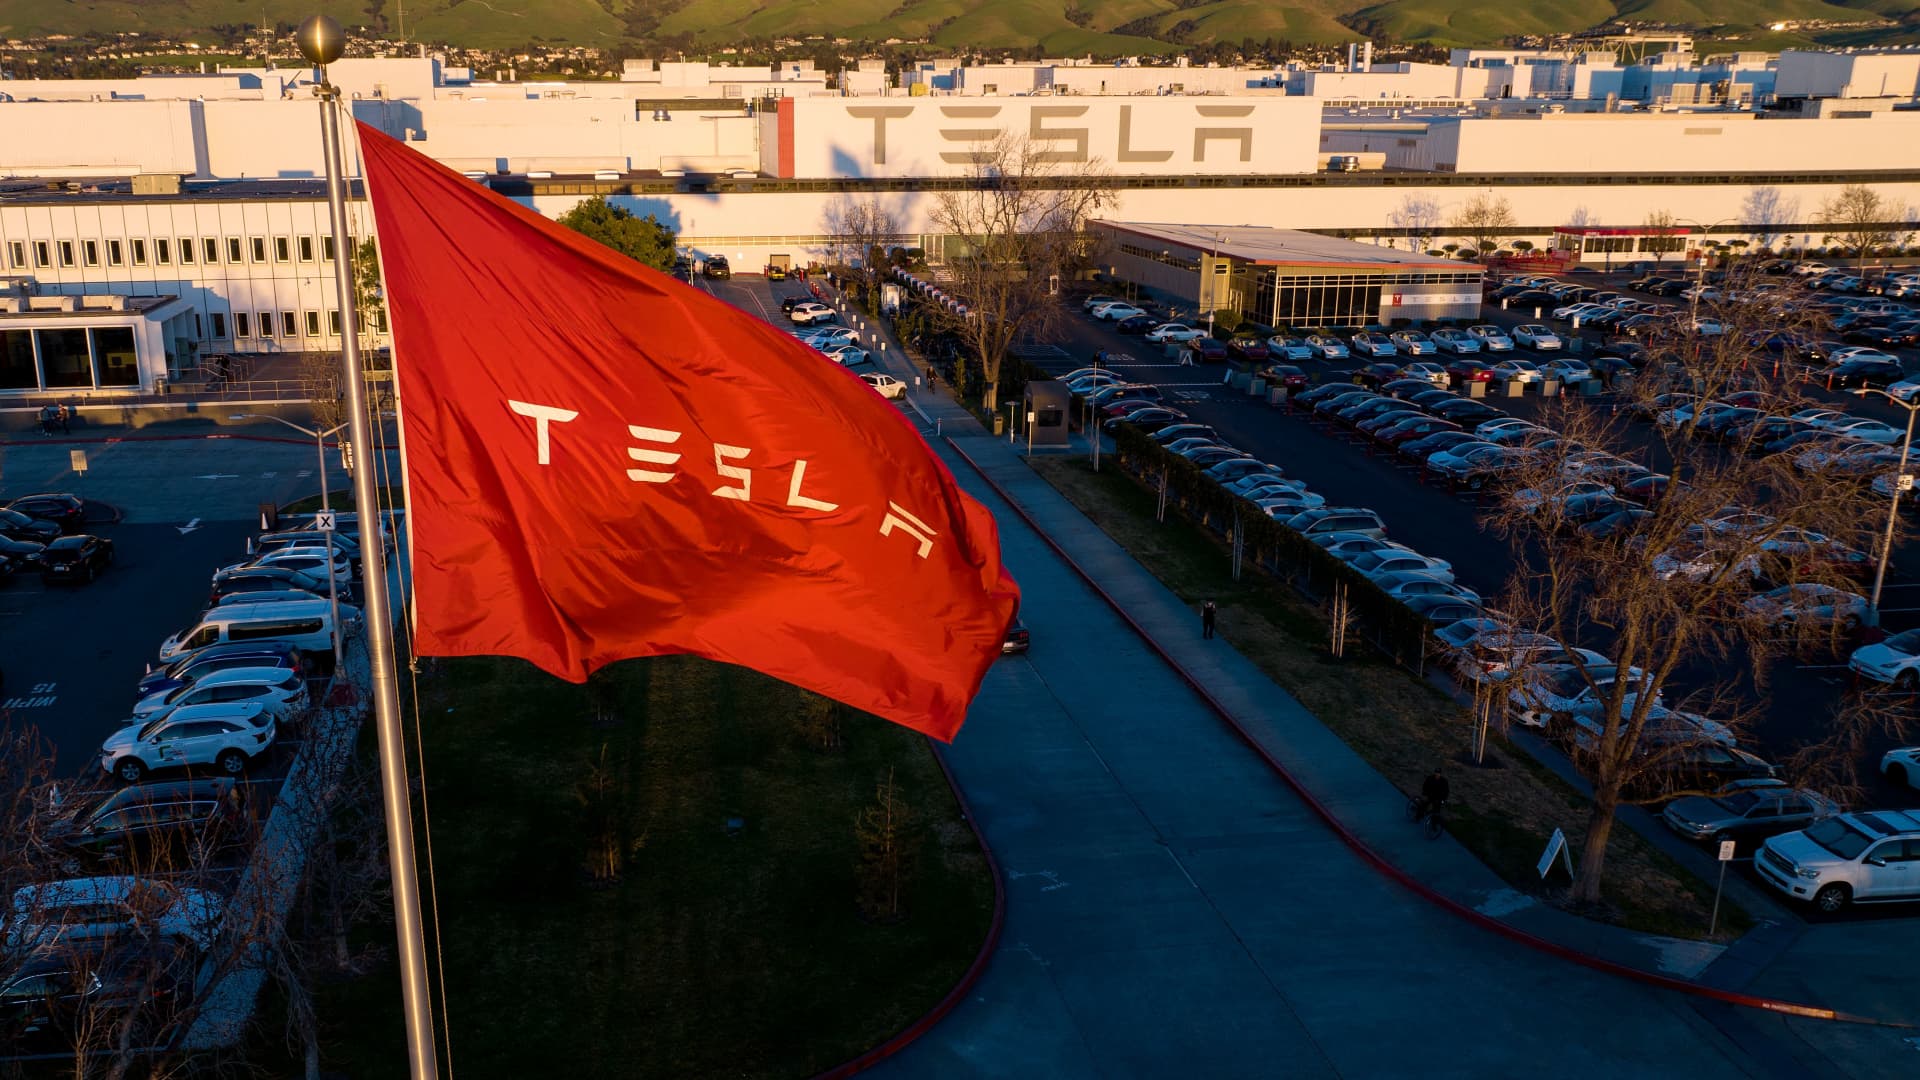 Tesla ban on pro-union shirts violated workers’ rights: NLRB